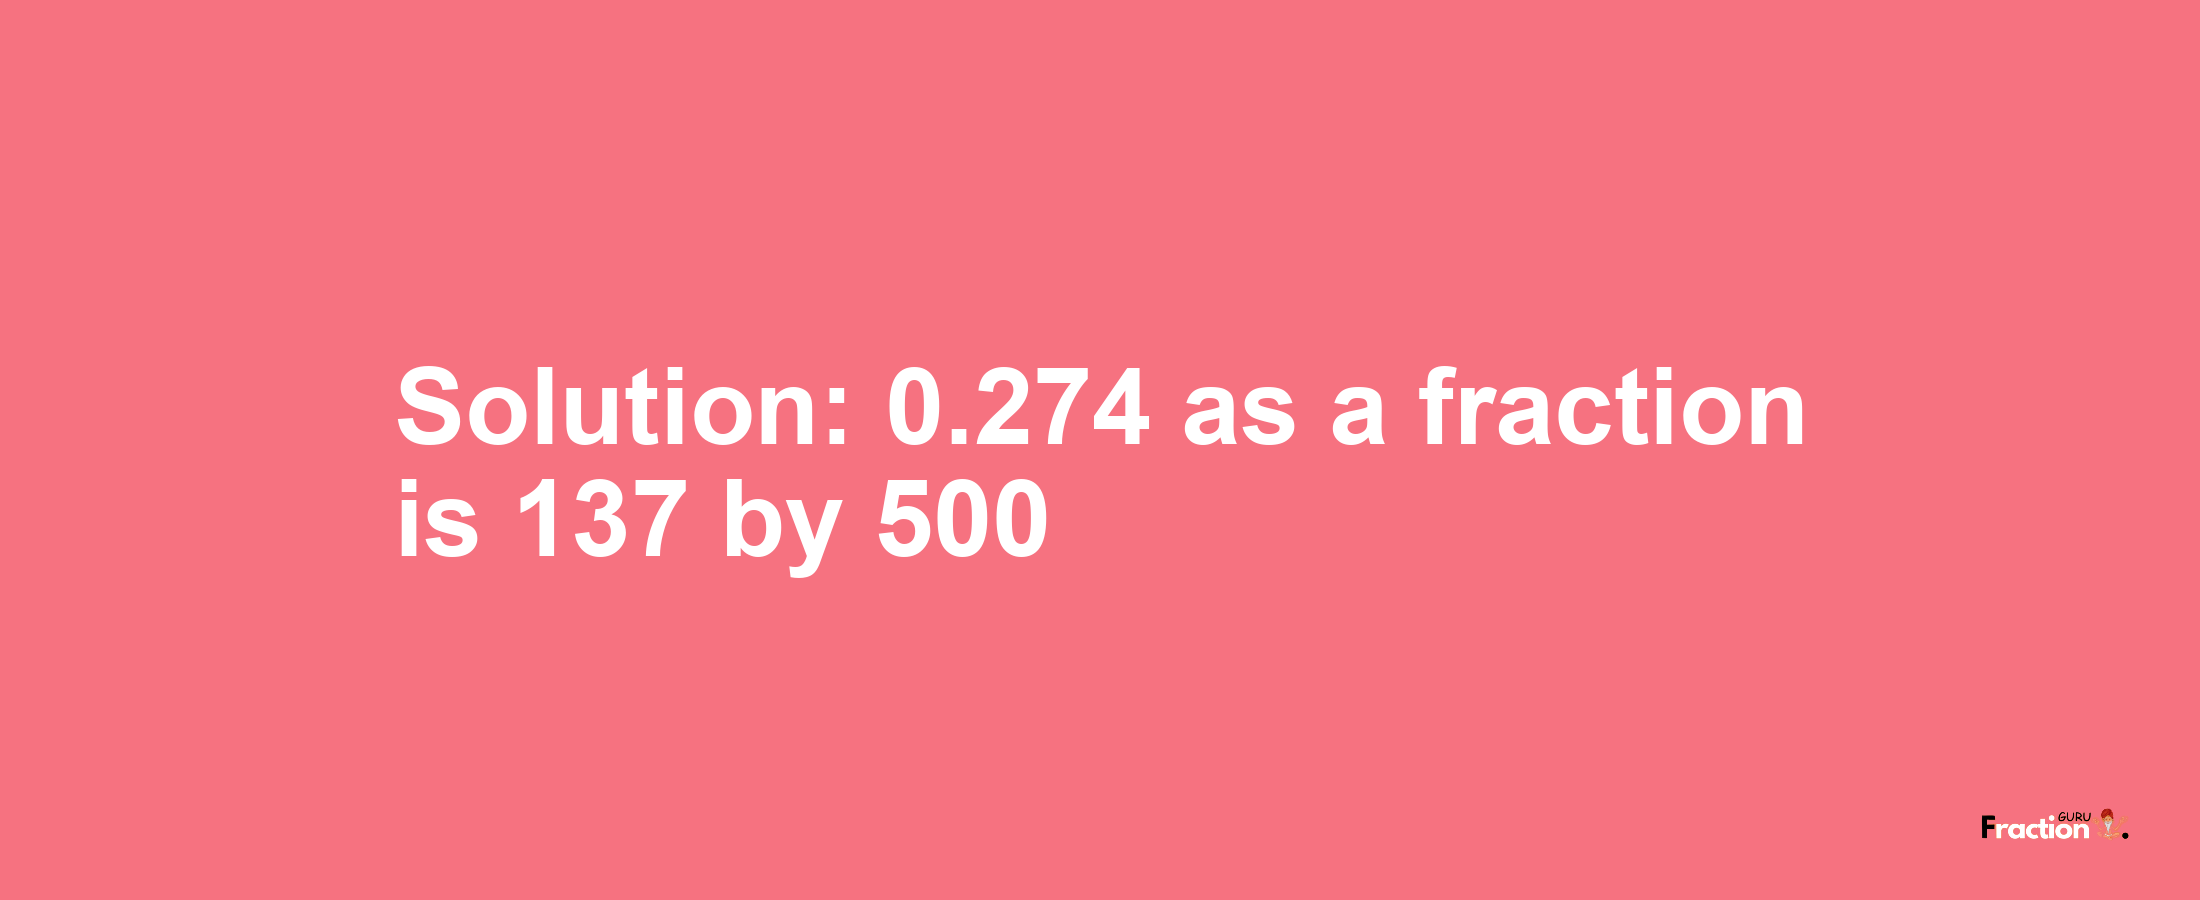 Solution:0.274 as a fraction is 137/500